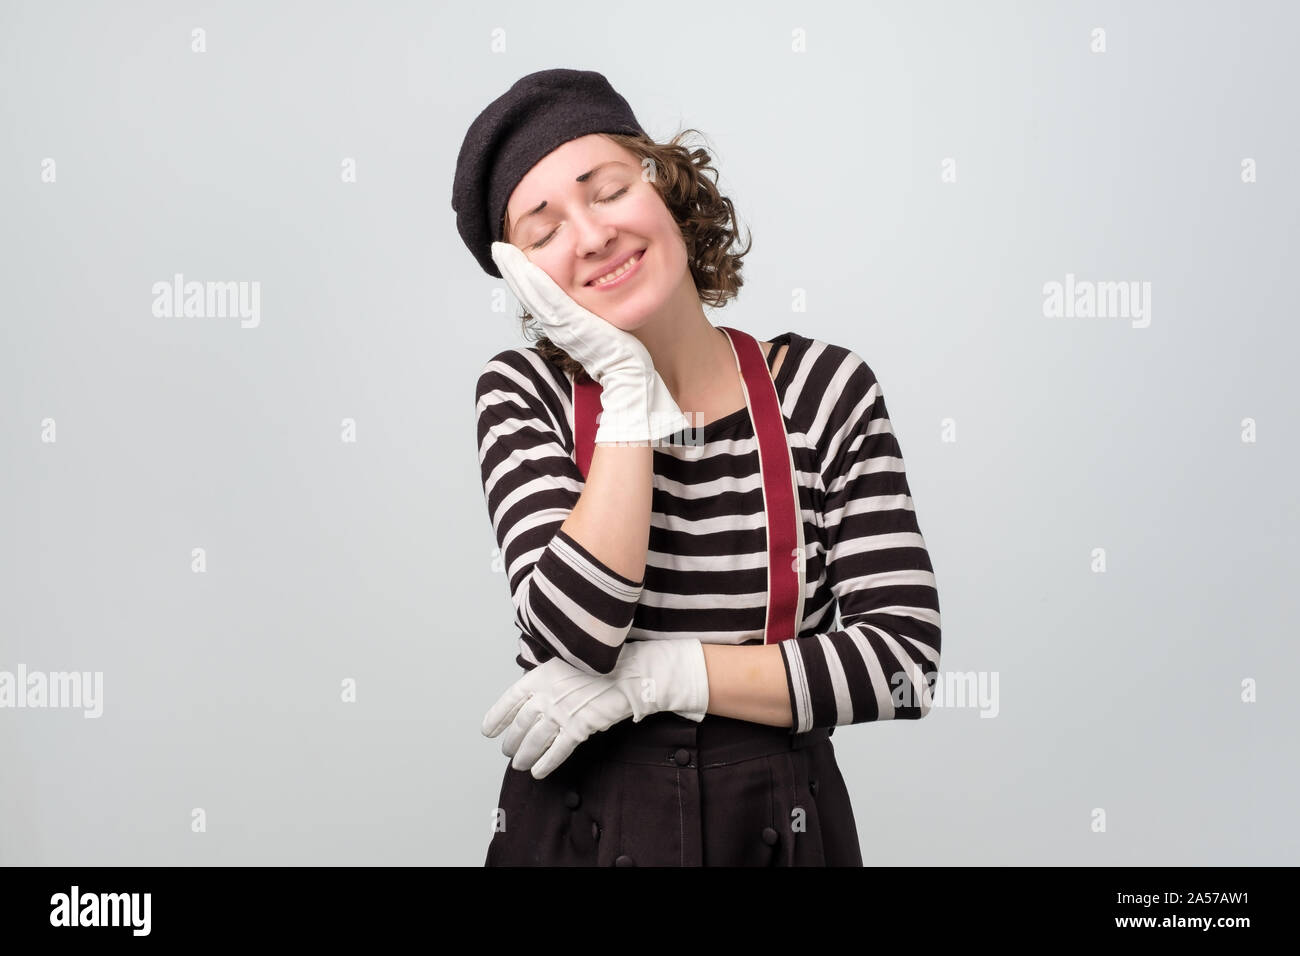 mime woman sleeping tired dreaming with hands together while smiling Stock Photo